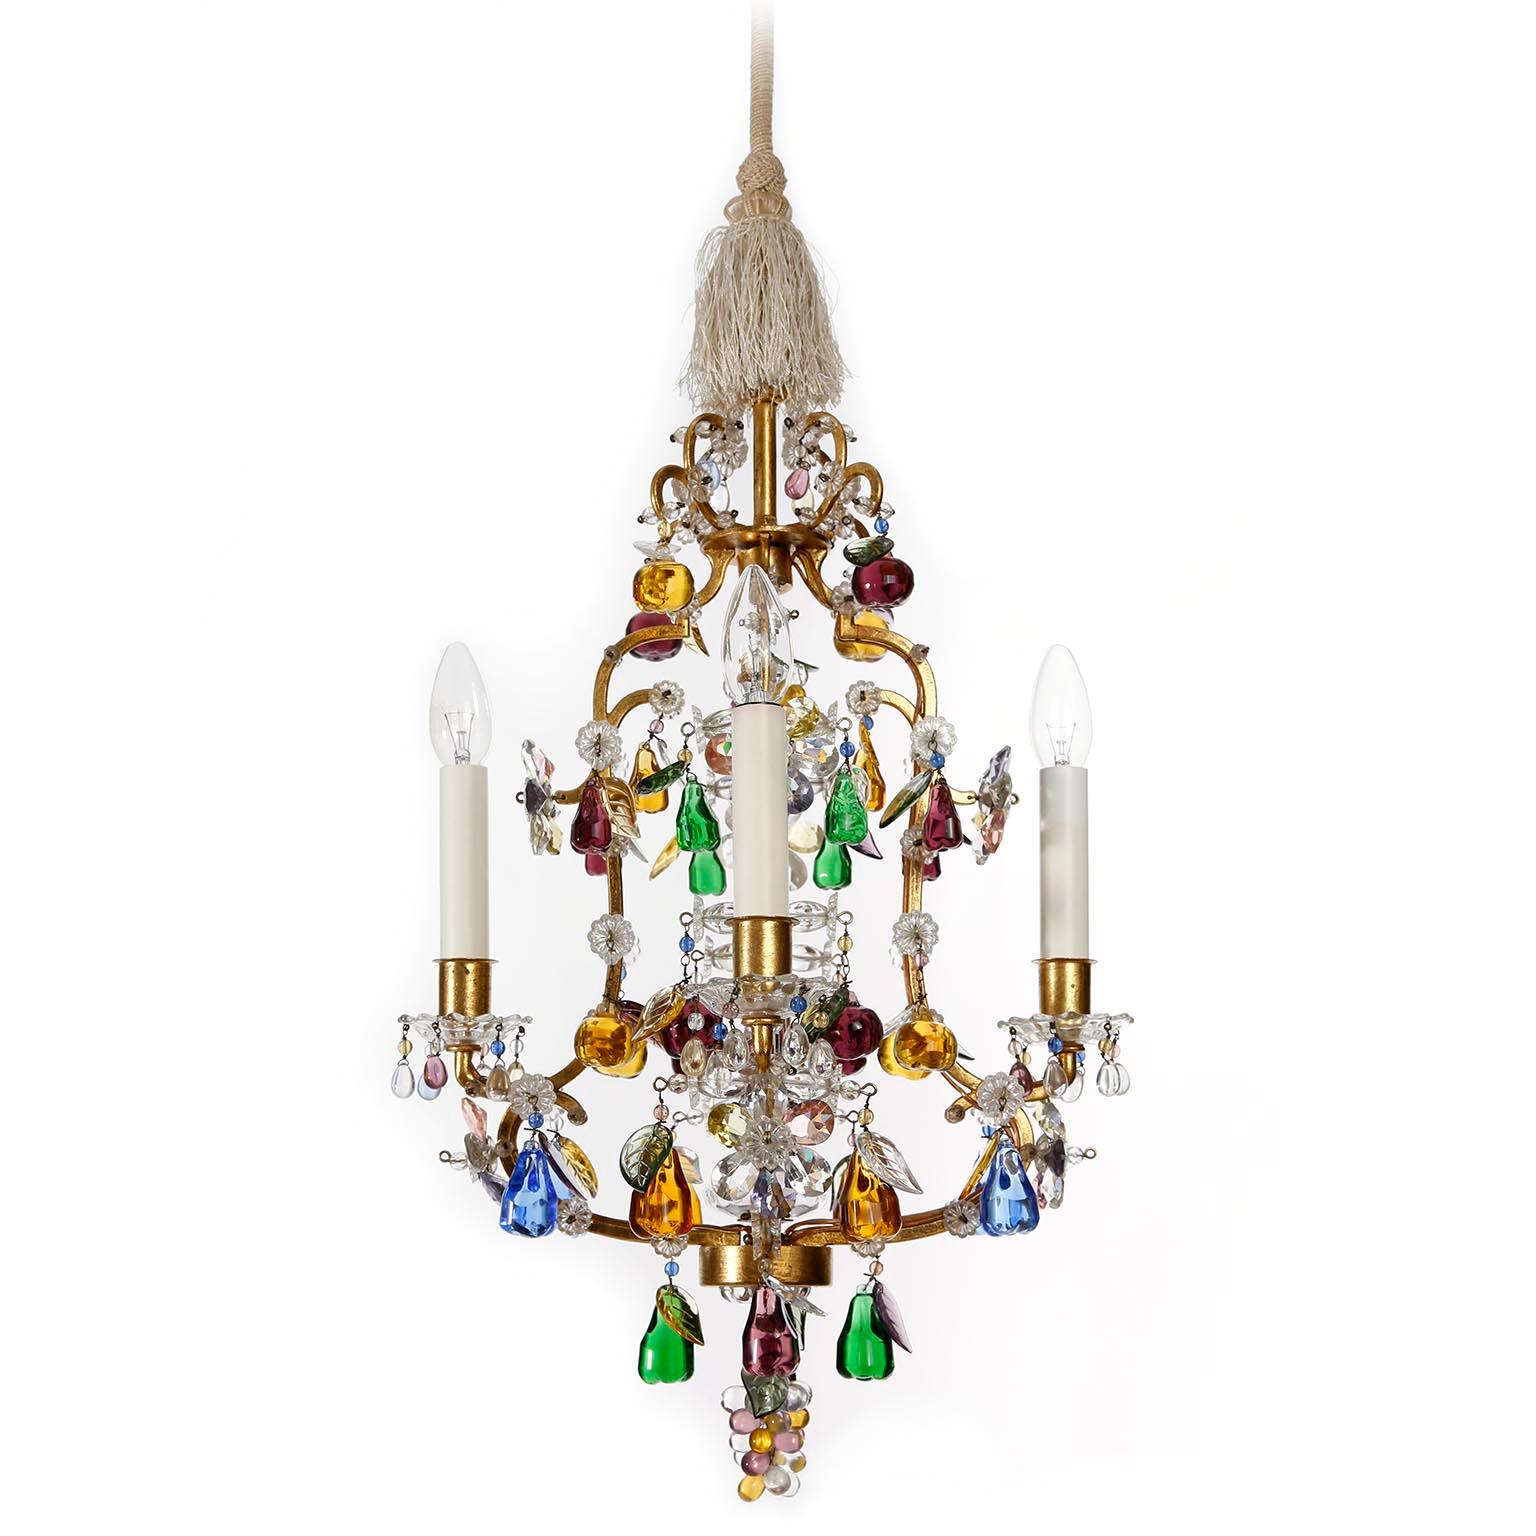 A chandelier from the 'fruit'-series by J. & L. Lobmeyr, Austria, Vienna, manufactured in midcentury, circa 1950.
It is made of leaf gold plated metal frame decorated with colorful glass fruits and clear cut glass. The fruits are apples, pears and